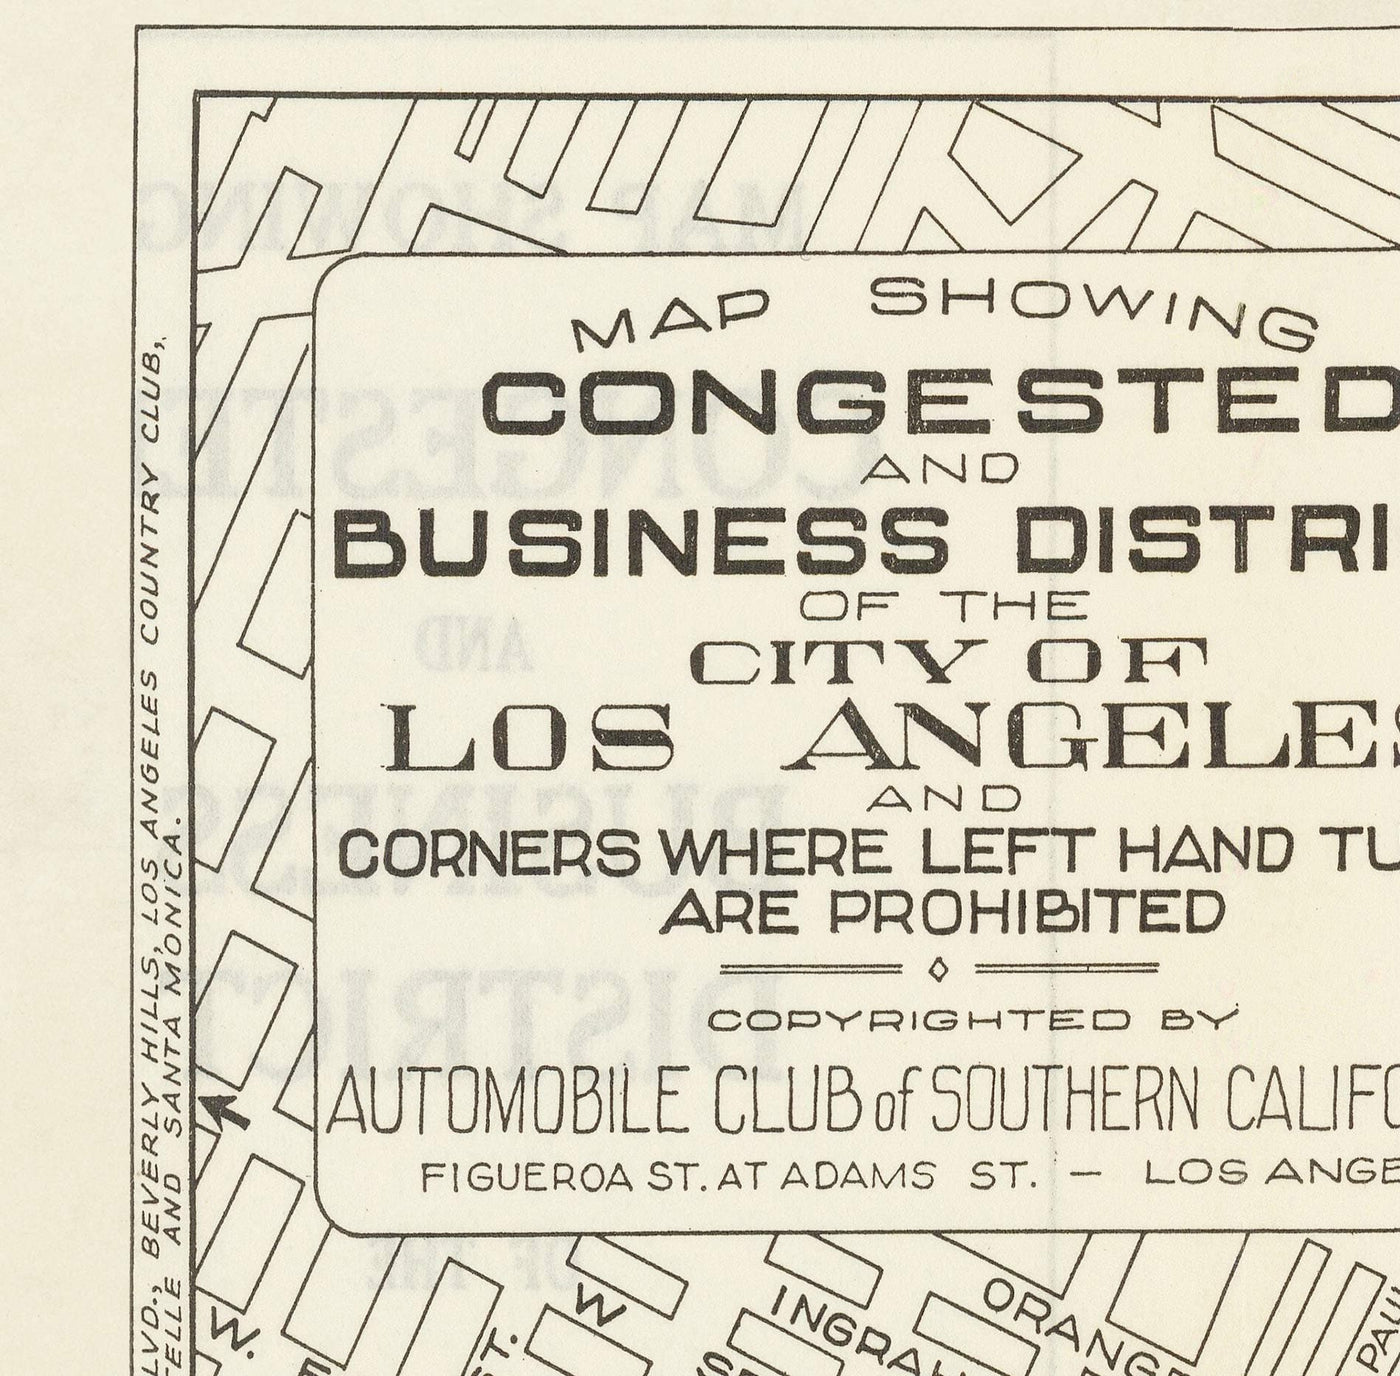 Old Congestion Map of Los Angeles, 1920 - Rare Automobile Traffic Guide of Downtown LA